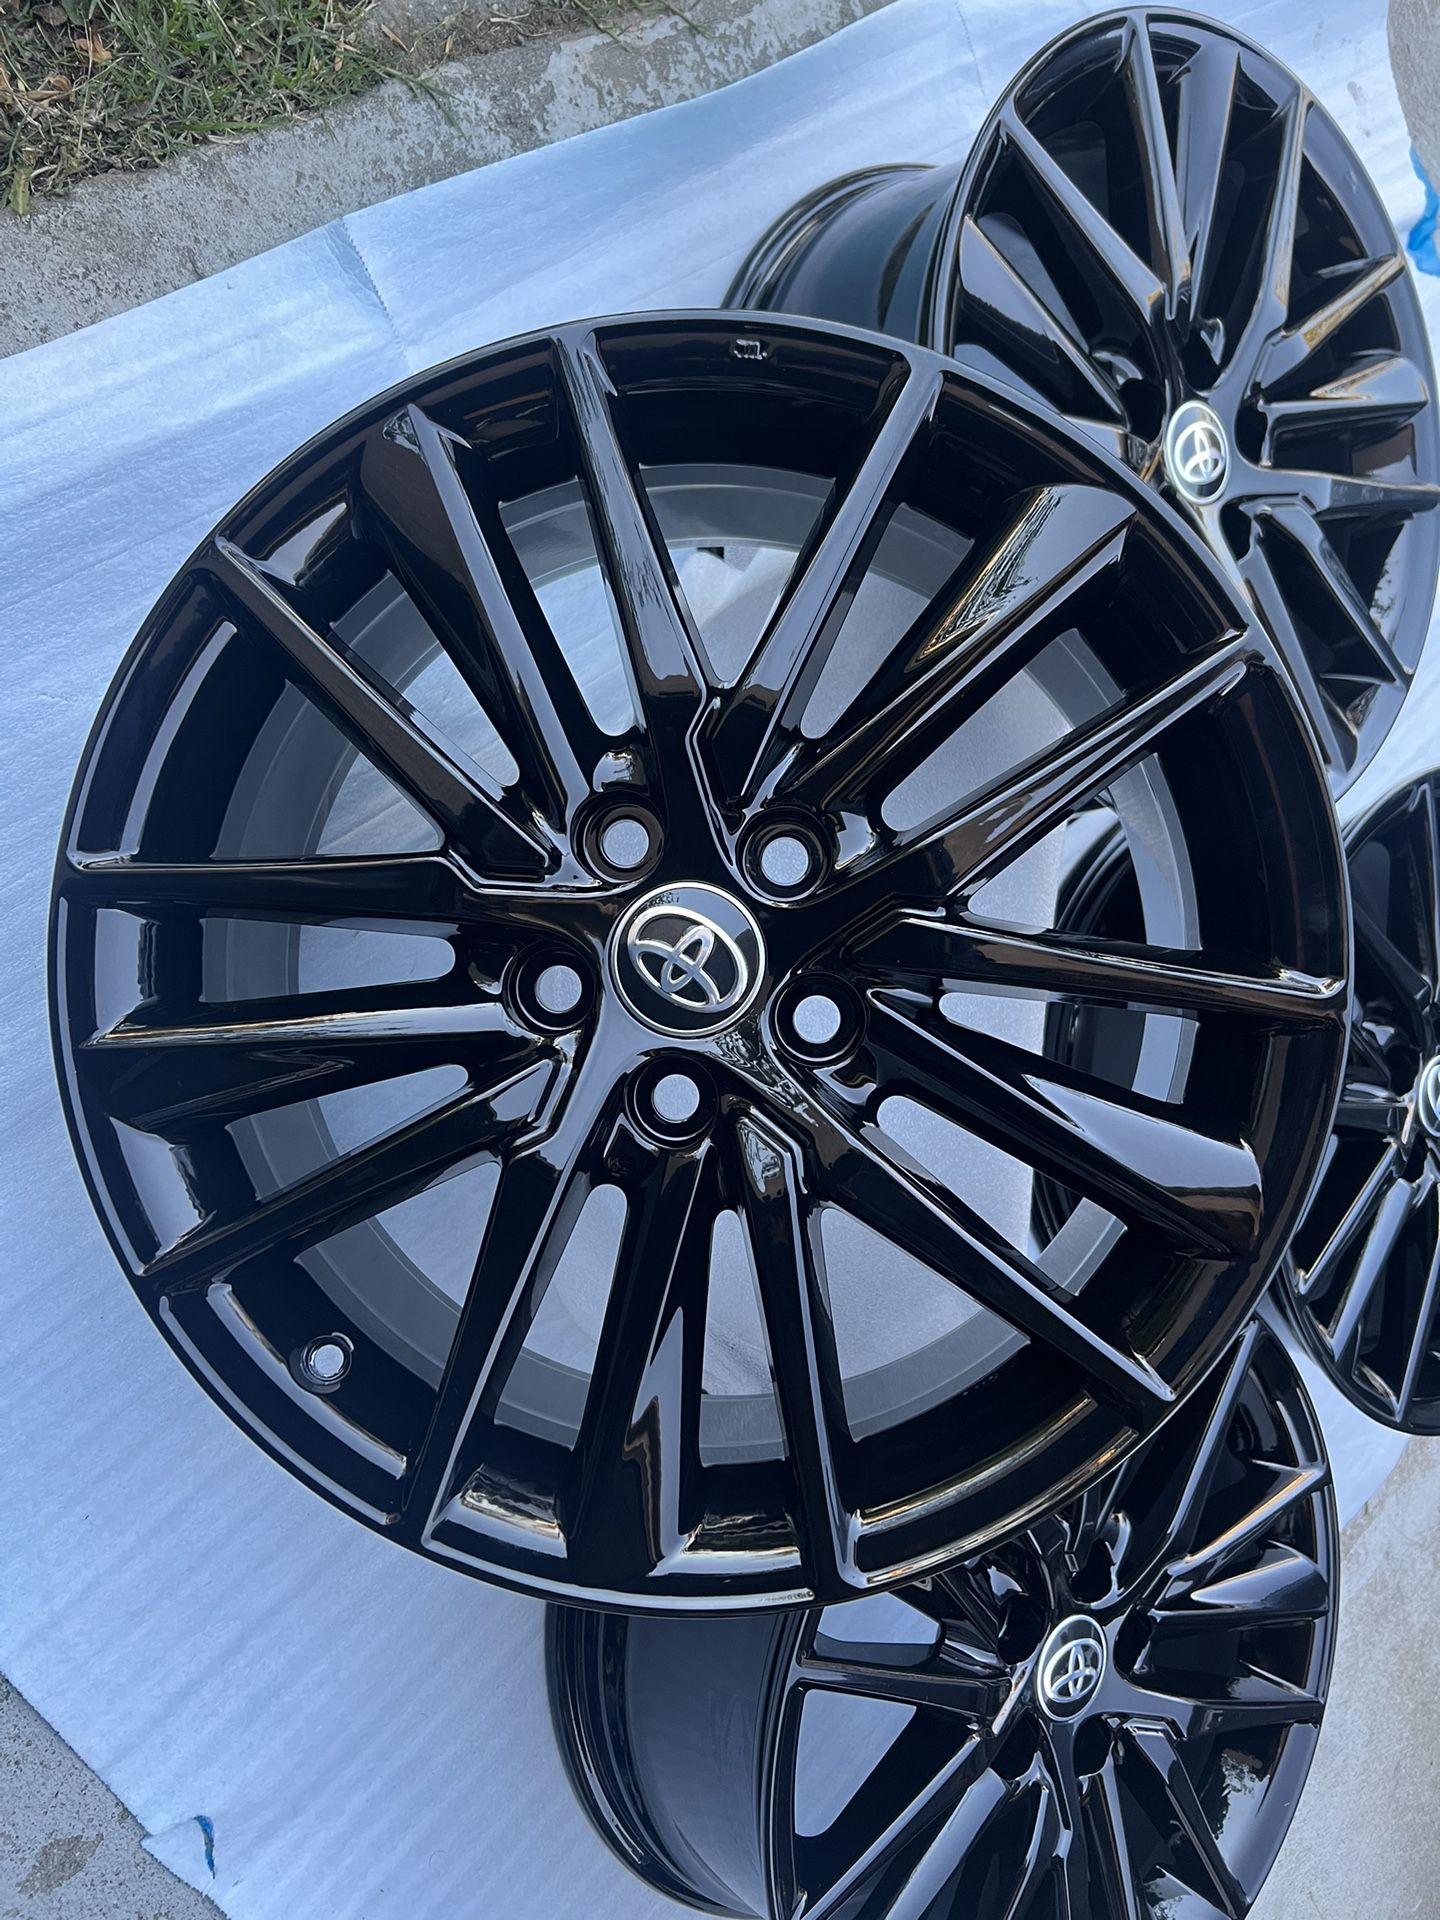 Toyota Camry Rims 18” Rines OEM Factory Wheels Fits Camry Avalon New Gloss Black Powder Coated  